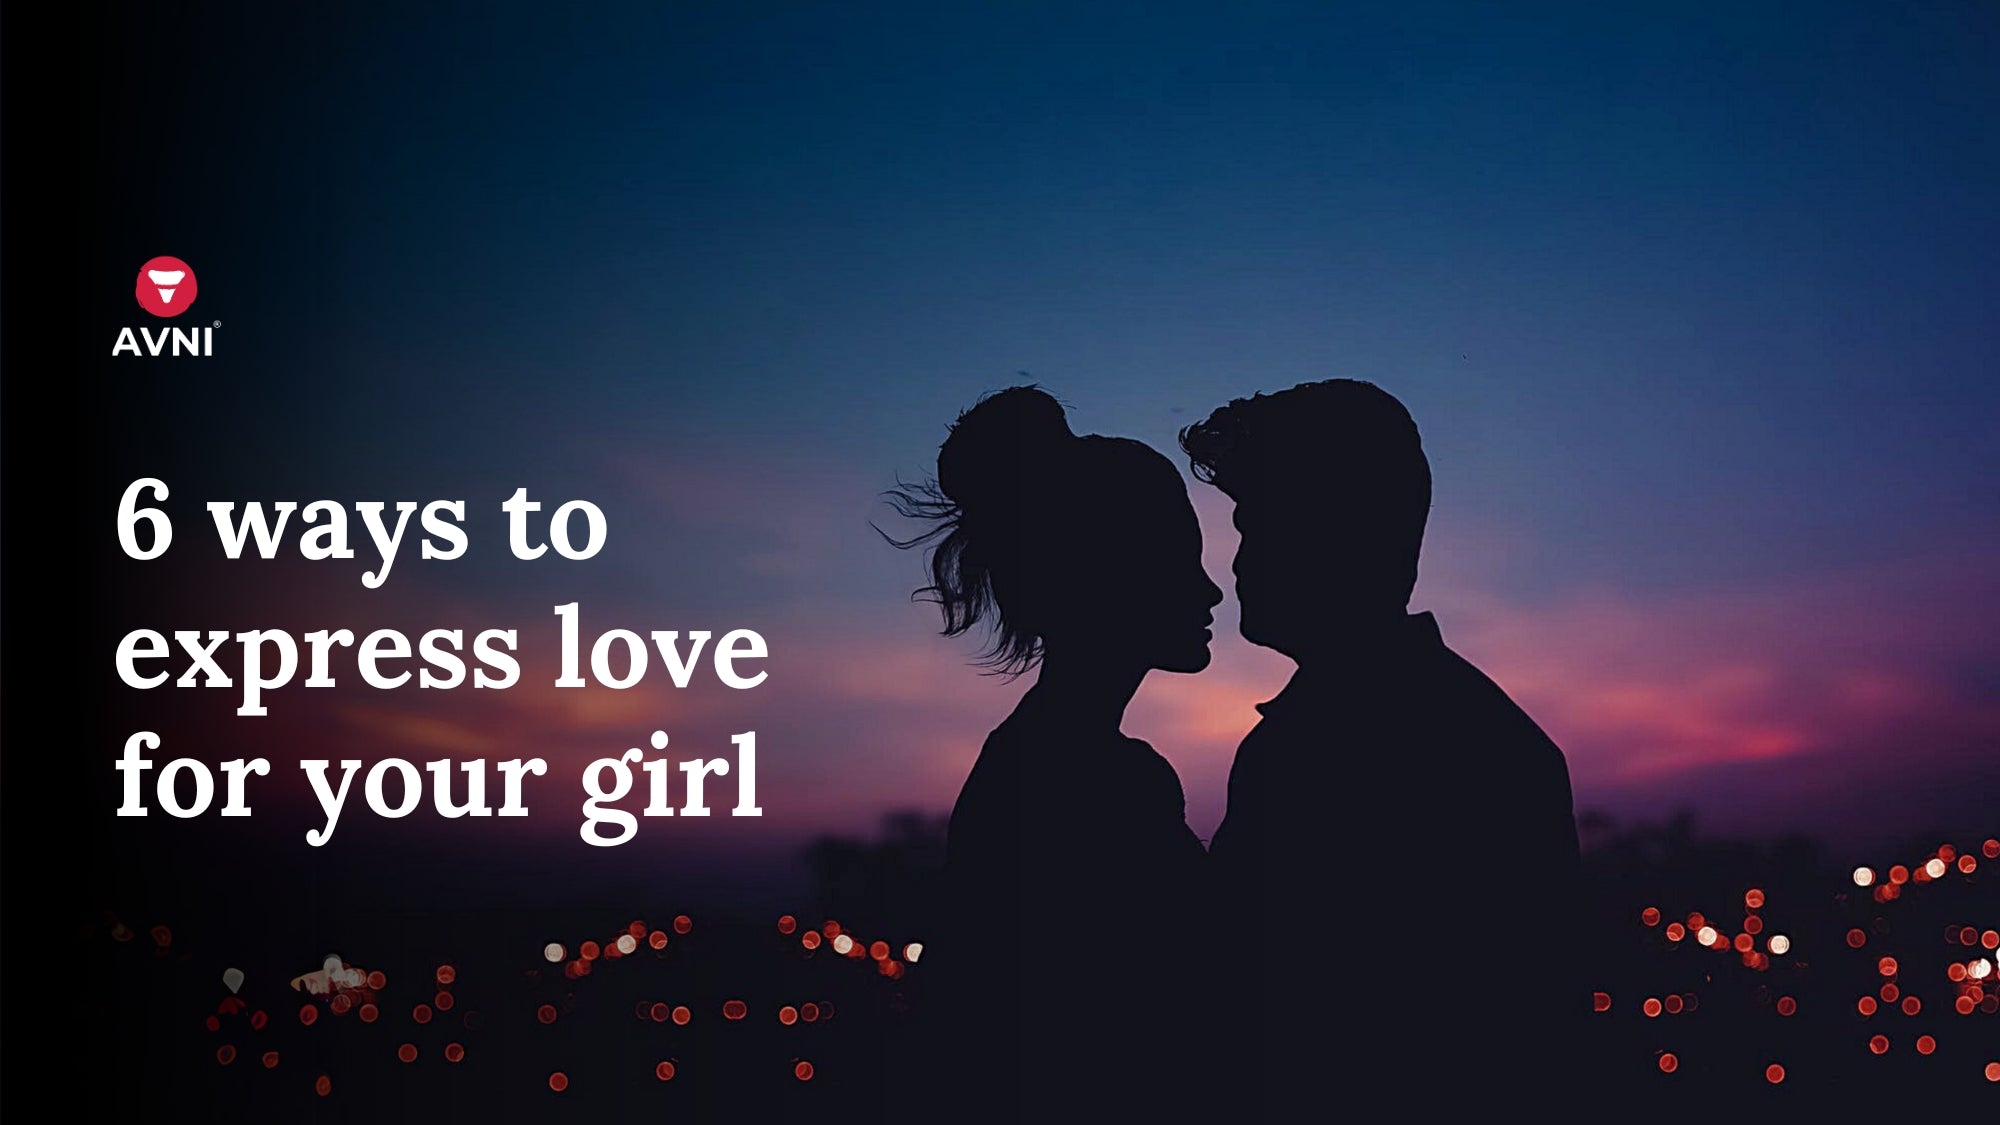 6 Ways to express love for your girl